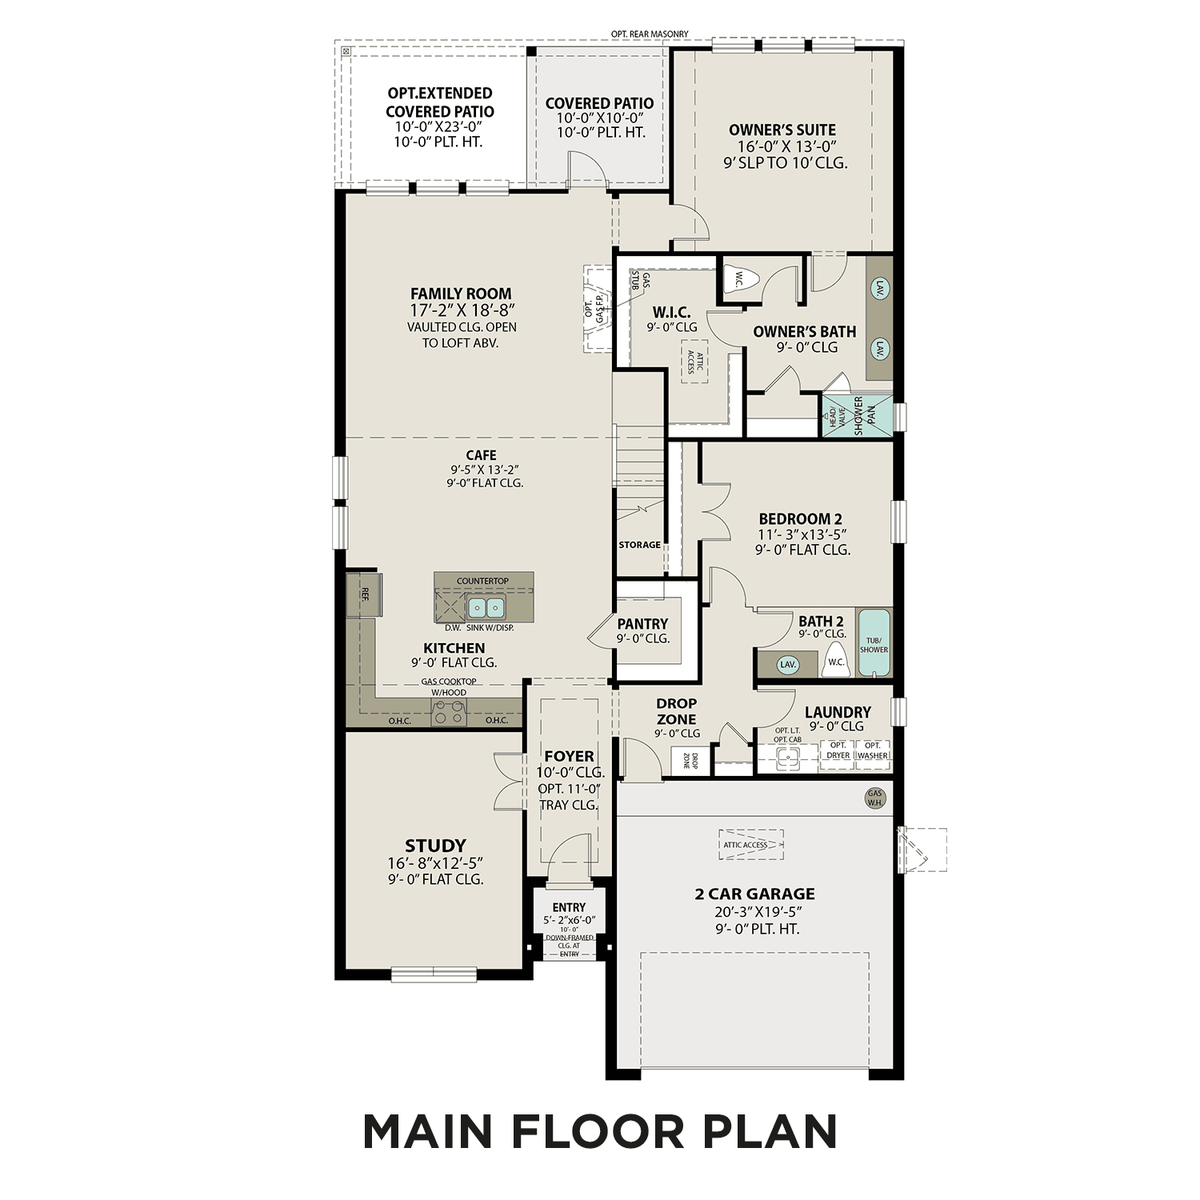 1 - The Zion A buildable floor plan layout in Davidson Homes' Lago Mar community.